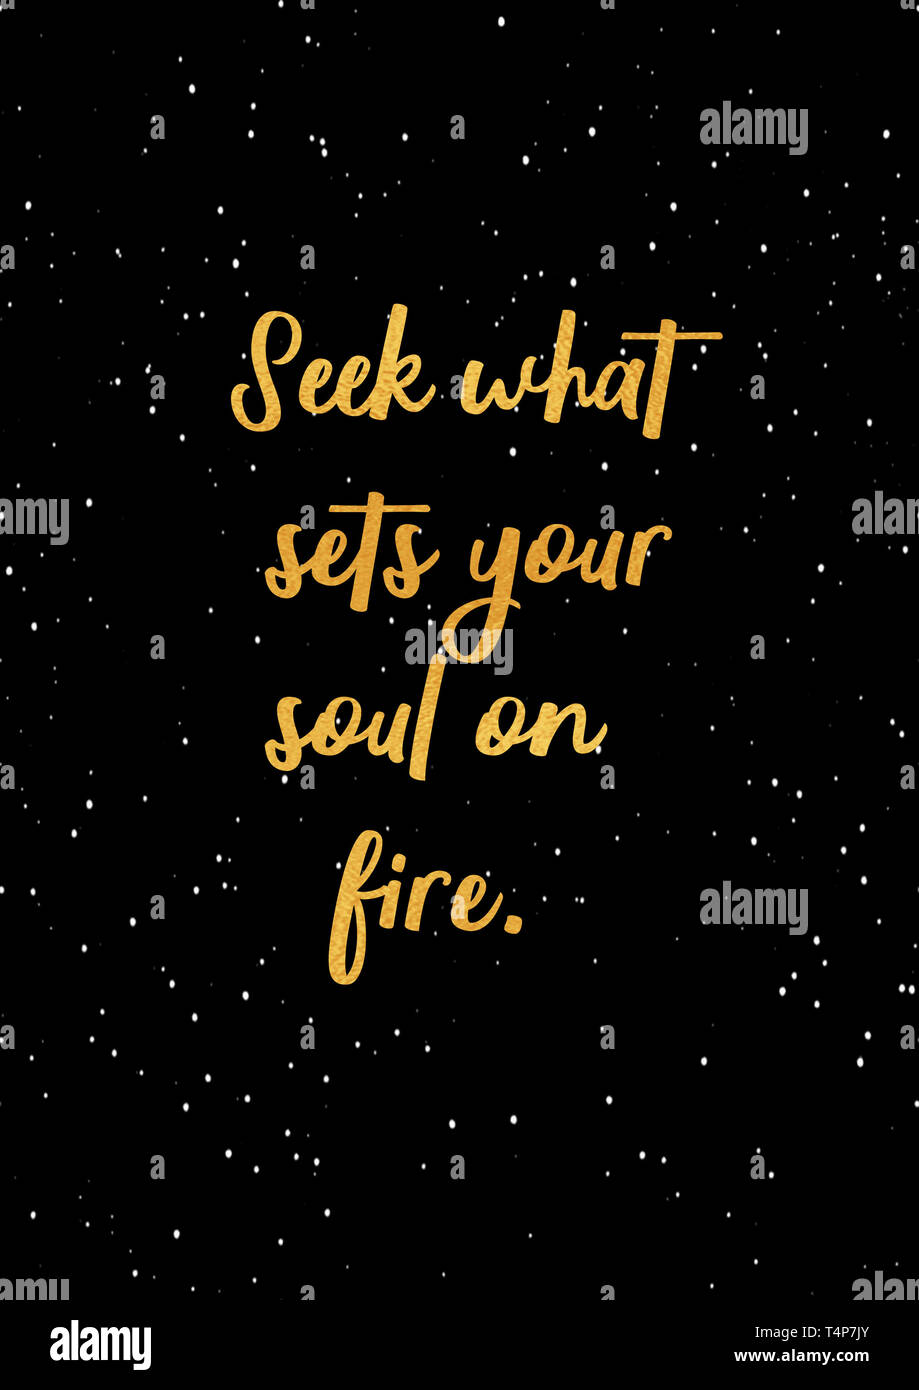 Seek what sets your soul on fire. Motivational quote in gold lettering Stock Photo